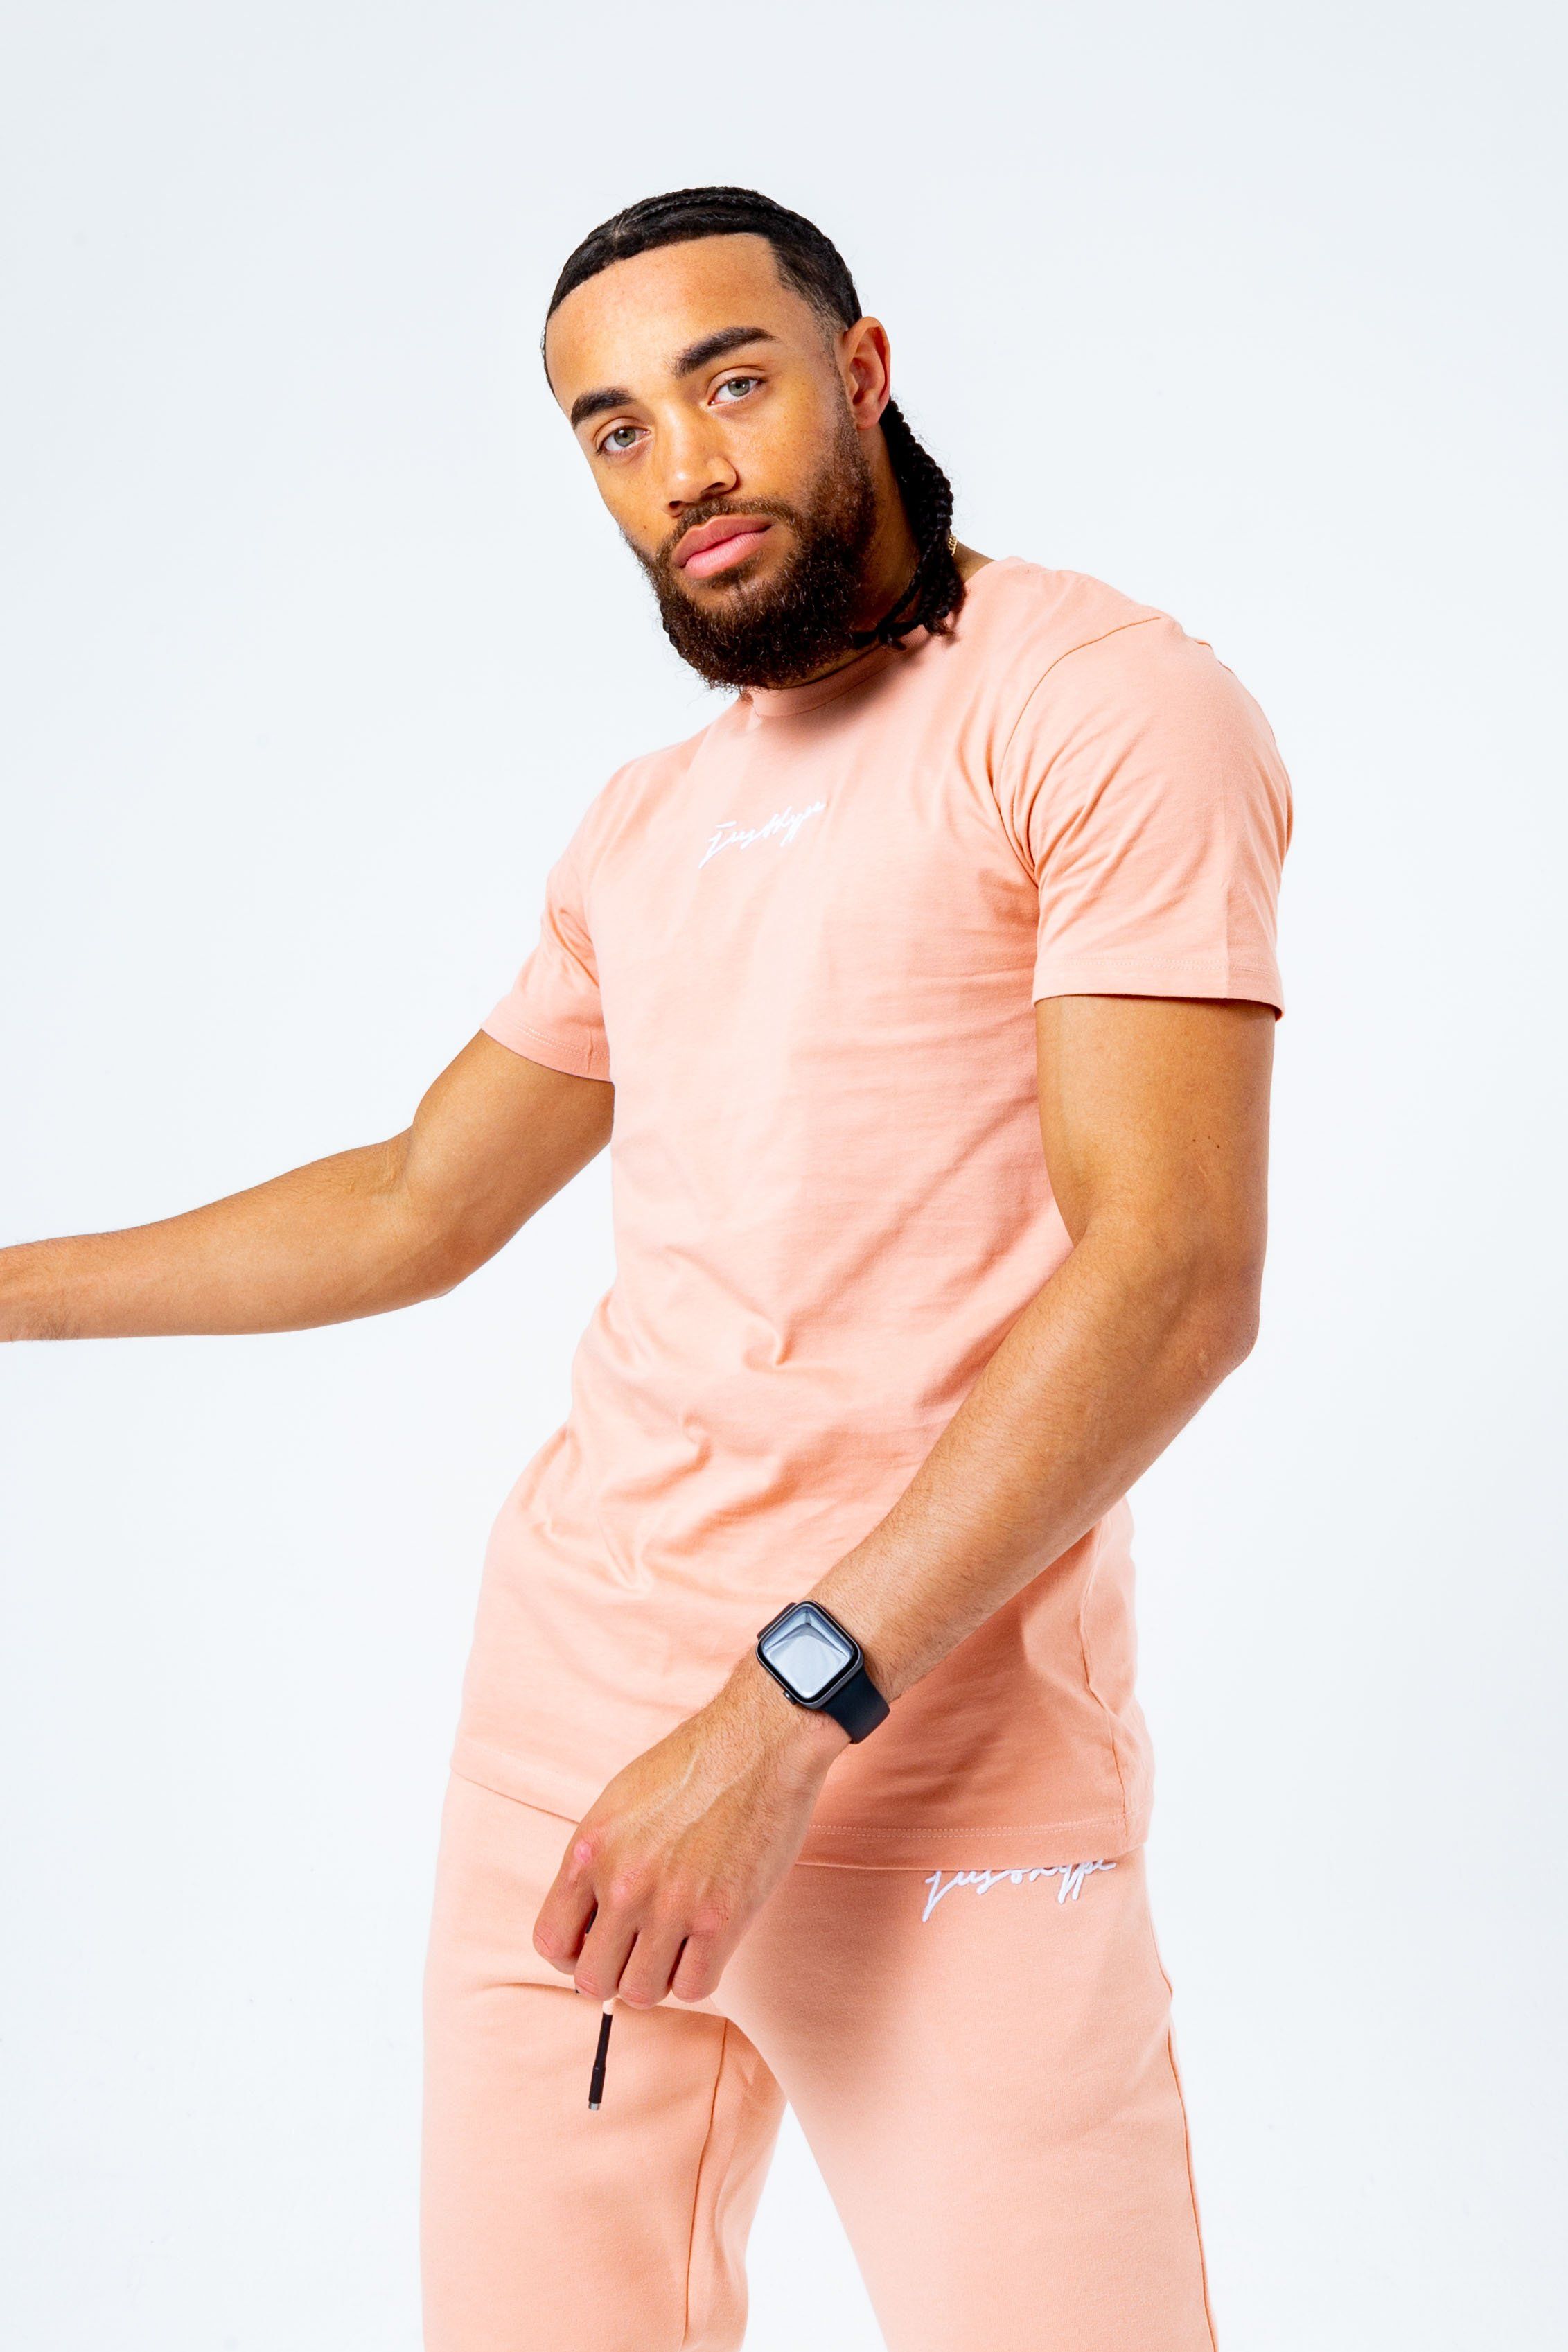 The perfect t-shirt to add to your everyday rotation. The HYPE. Pink Signature Men's T-Shirt is available in a size XXS to XXXL, doubles up as a day to night t-shirt, with supreme amount of comfort with a 100% cotton fabric base. Designed in a pink base and a contrasting white new! justhype signature logo embroidered across the front. Wear with skinny fit jeans and box fresh jeans or keep it casual with a pair of dark wash denim shorts for beach days. Machine washable.